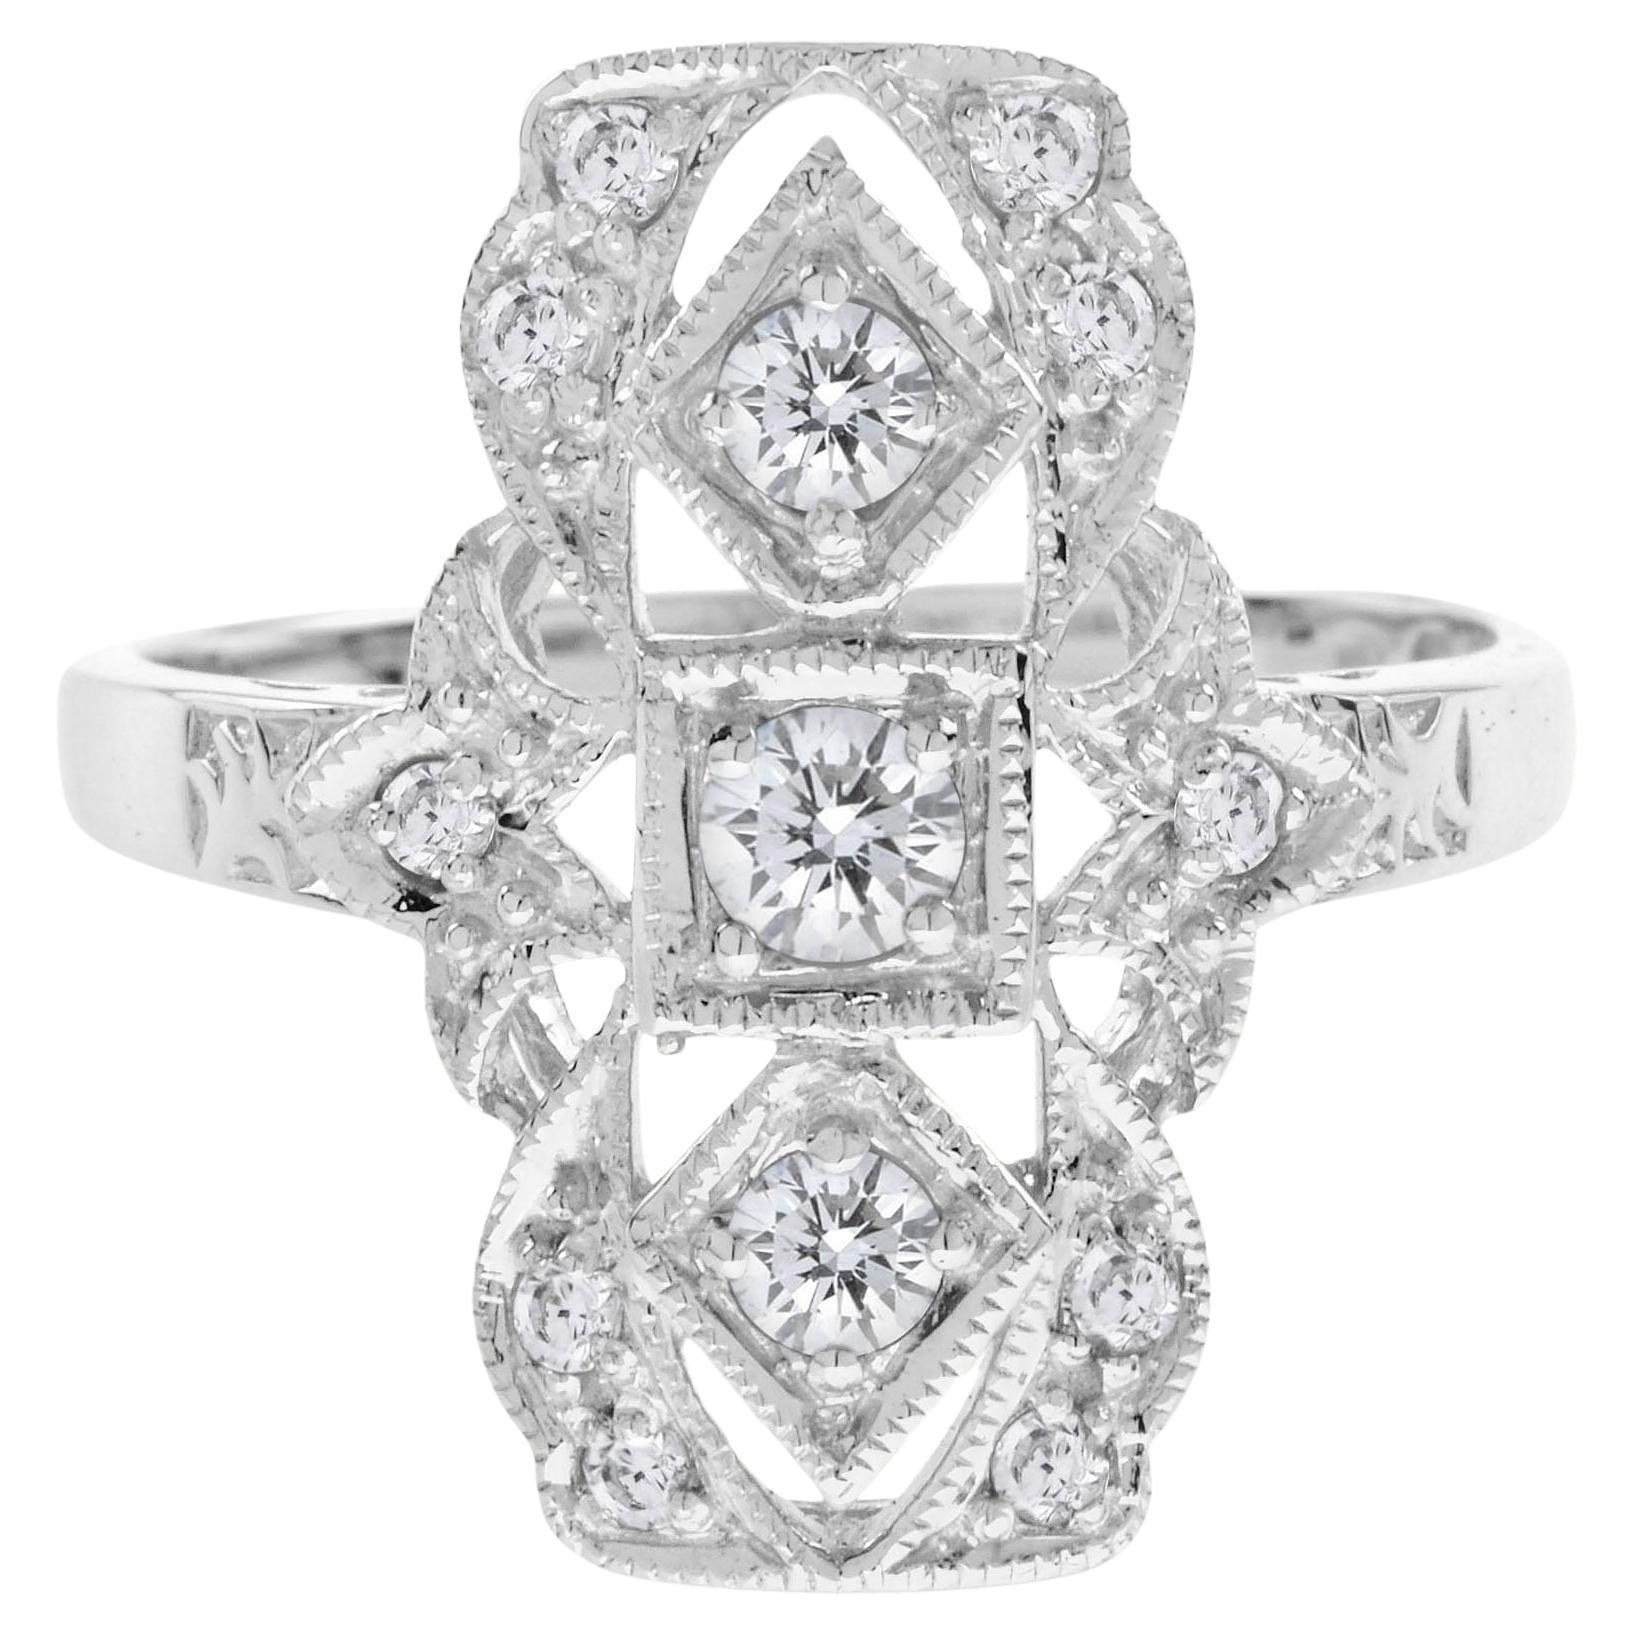 For Sale:  Art Deco Style Three Stone Filigree Dinner Ring in 18K White Gold